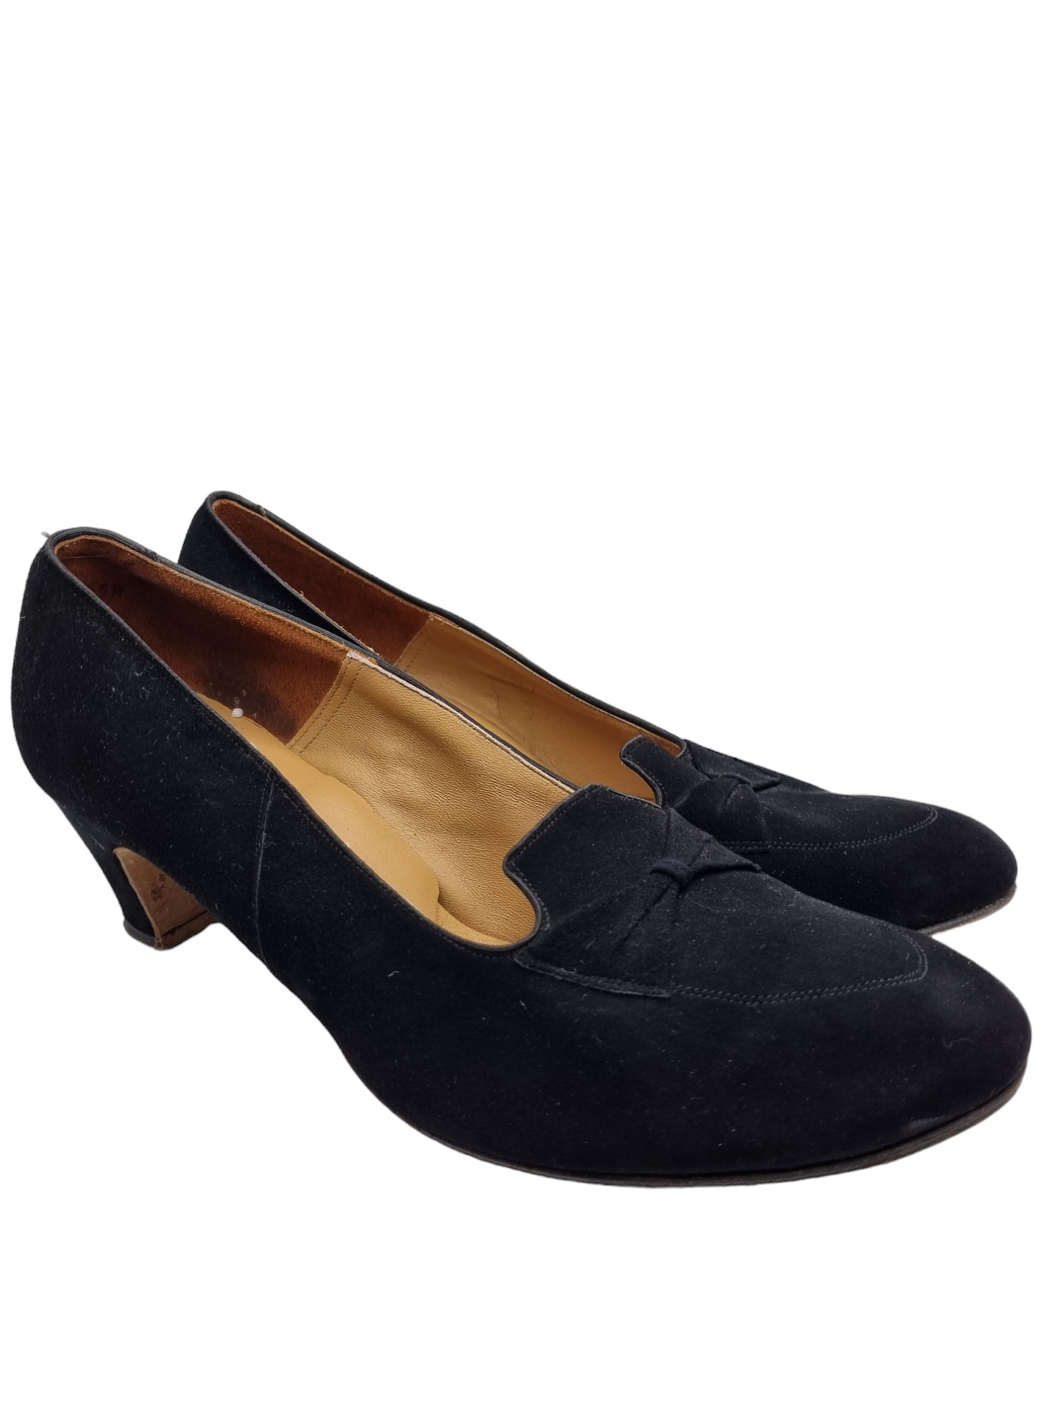 Late 1940s Black Suede Shoes